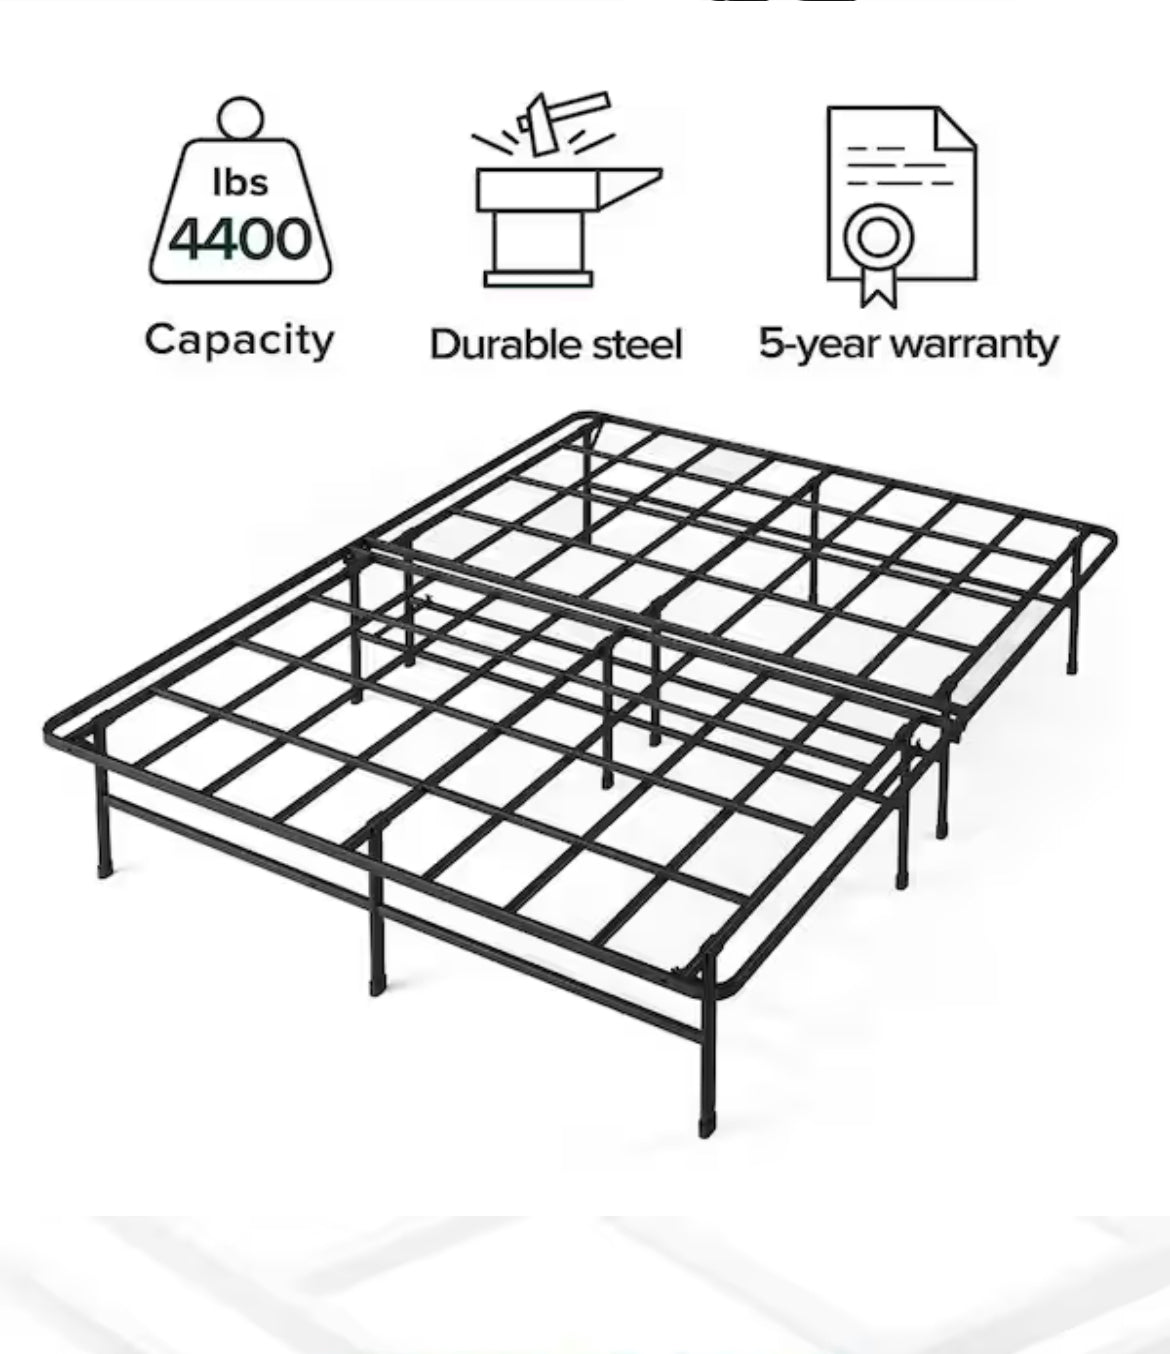 ZINUS SmartBase Super Heavy Duty Mattress Foundation with 4400lbs Weight Capacity / 14 Inch Metal Platform Bed Frame / No Box Spring Needed / Sturdy Steel Frame / Underbed Storage, King